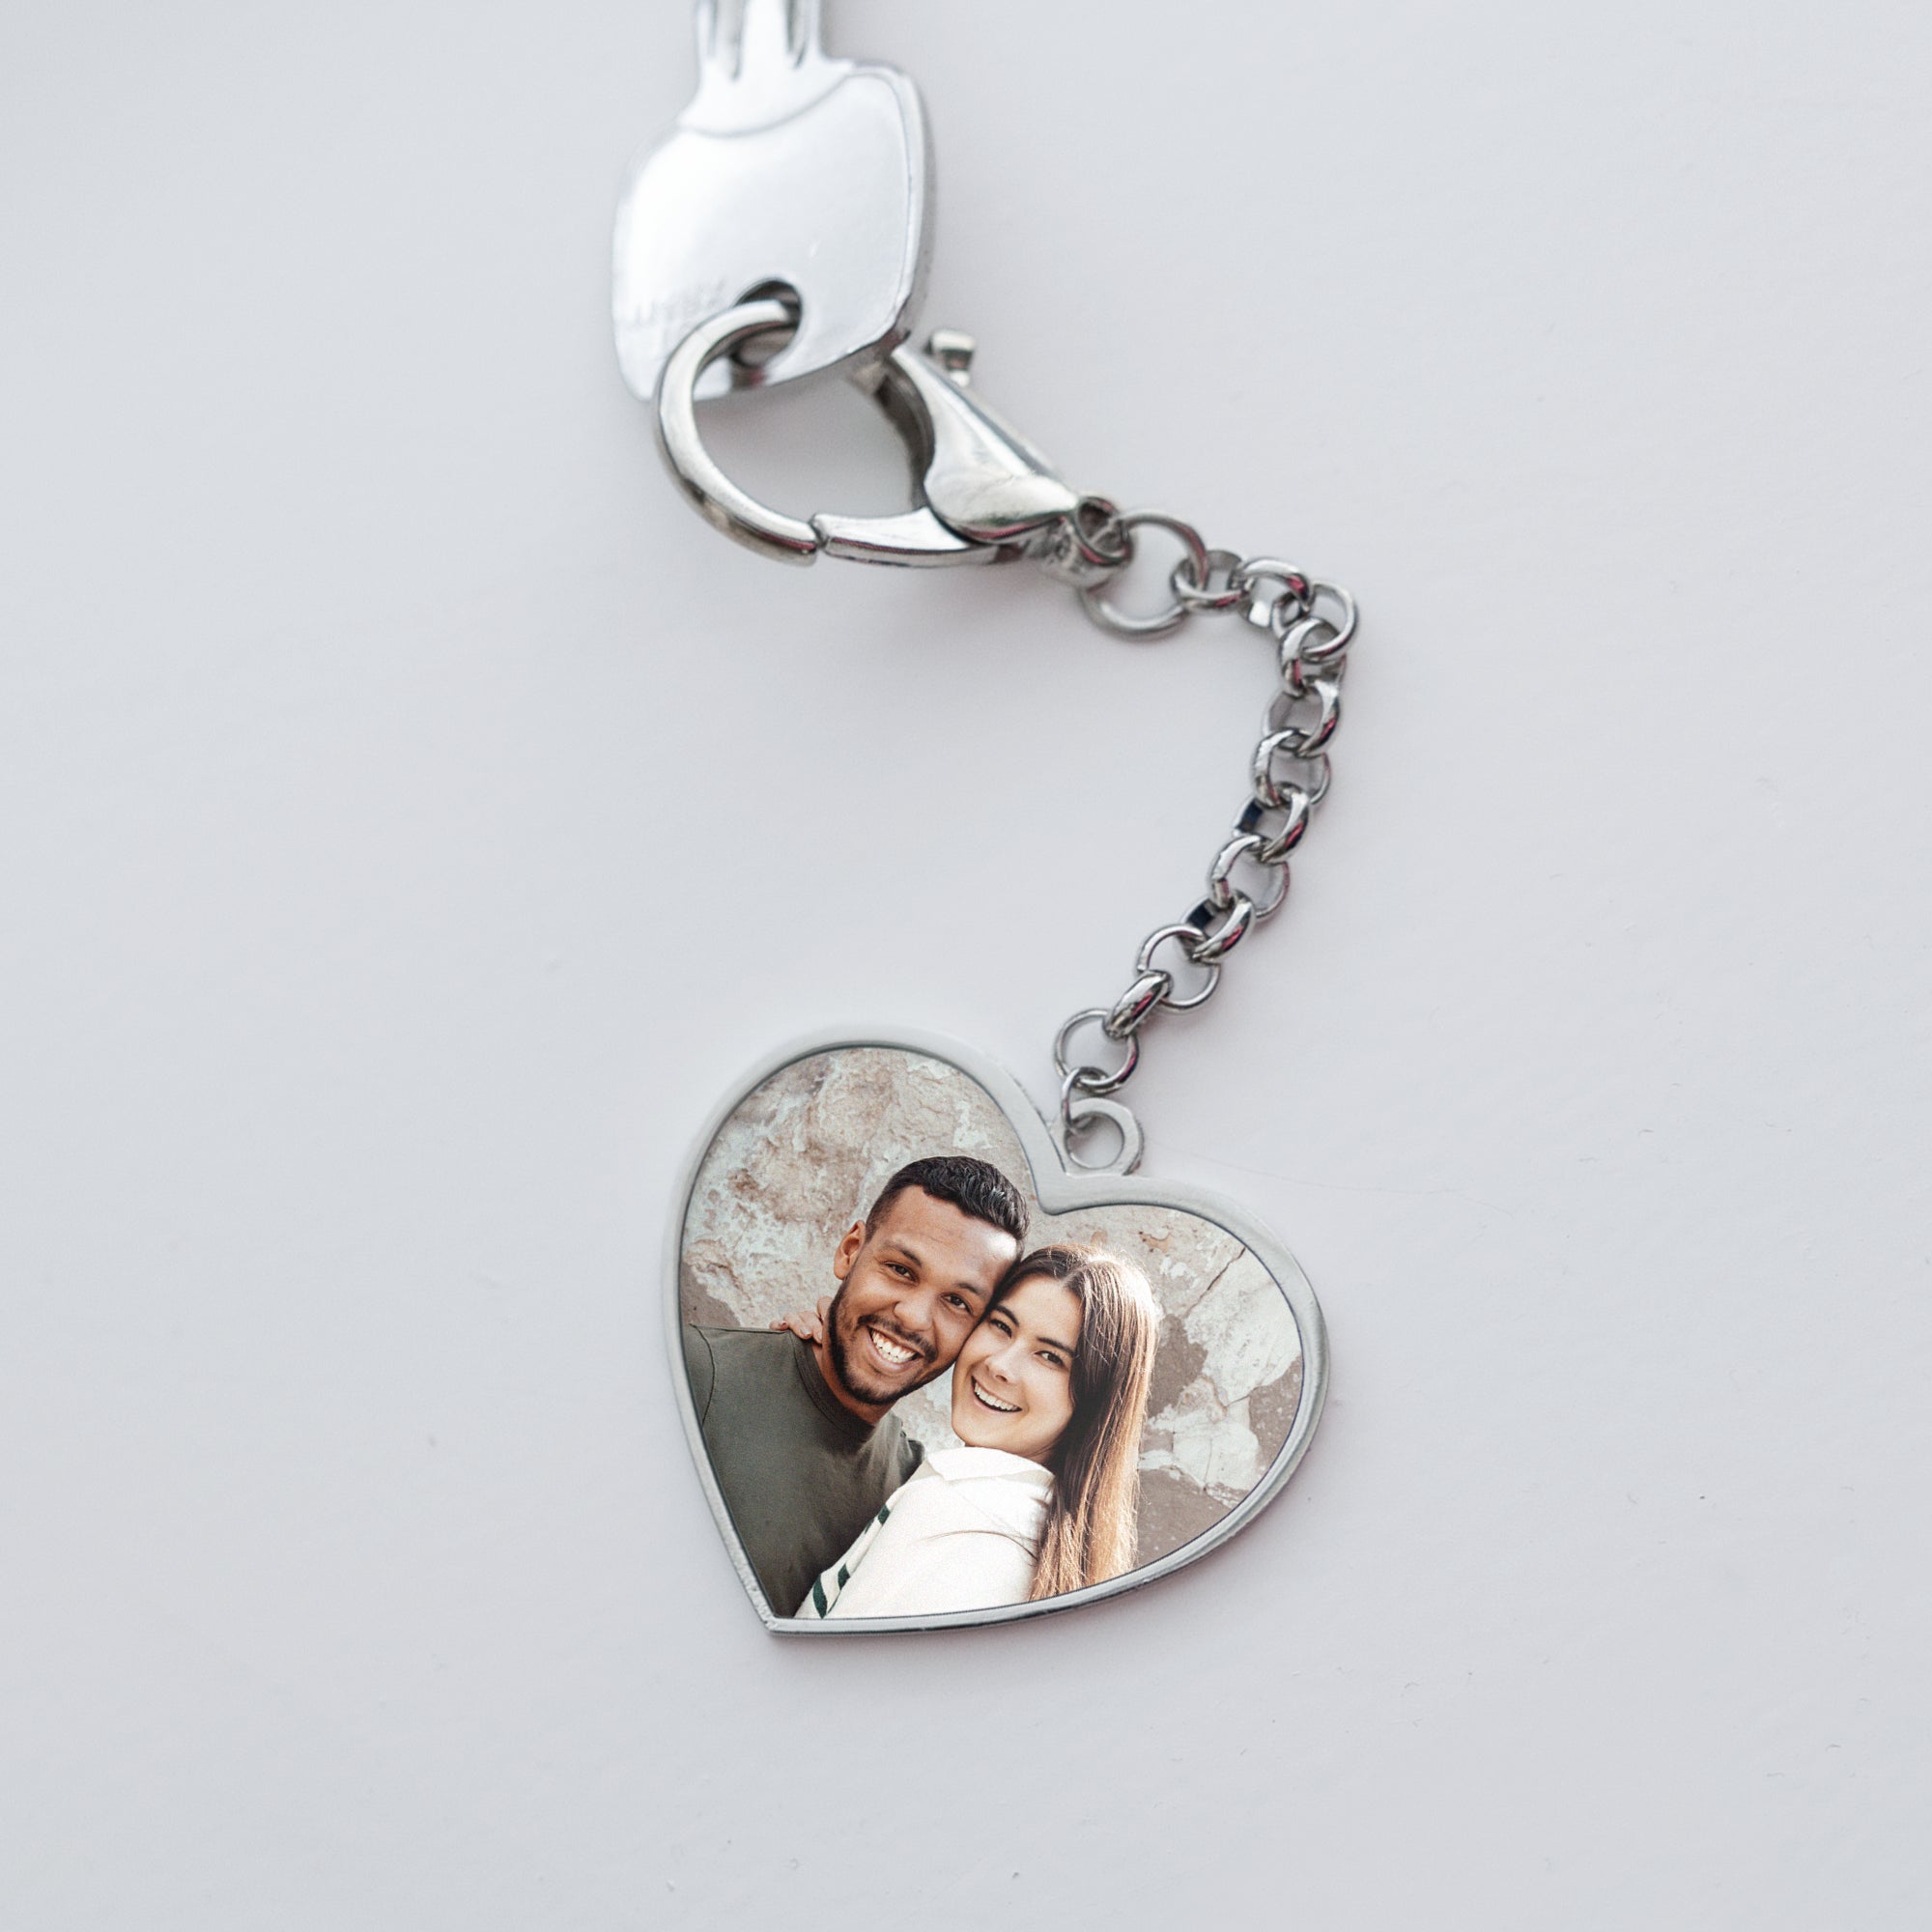 Personalised key ring - Heart - Double-sided - Stainless steel